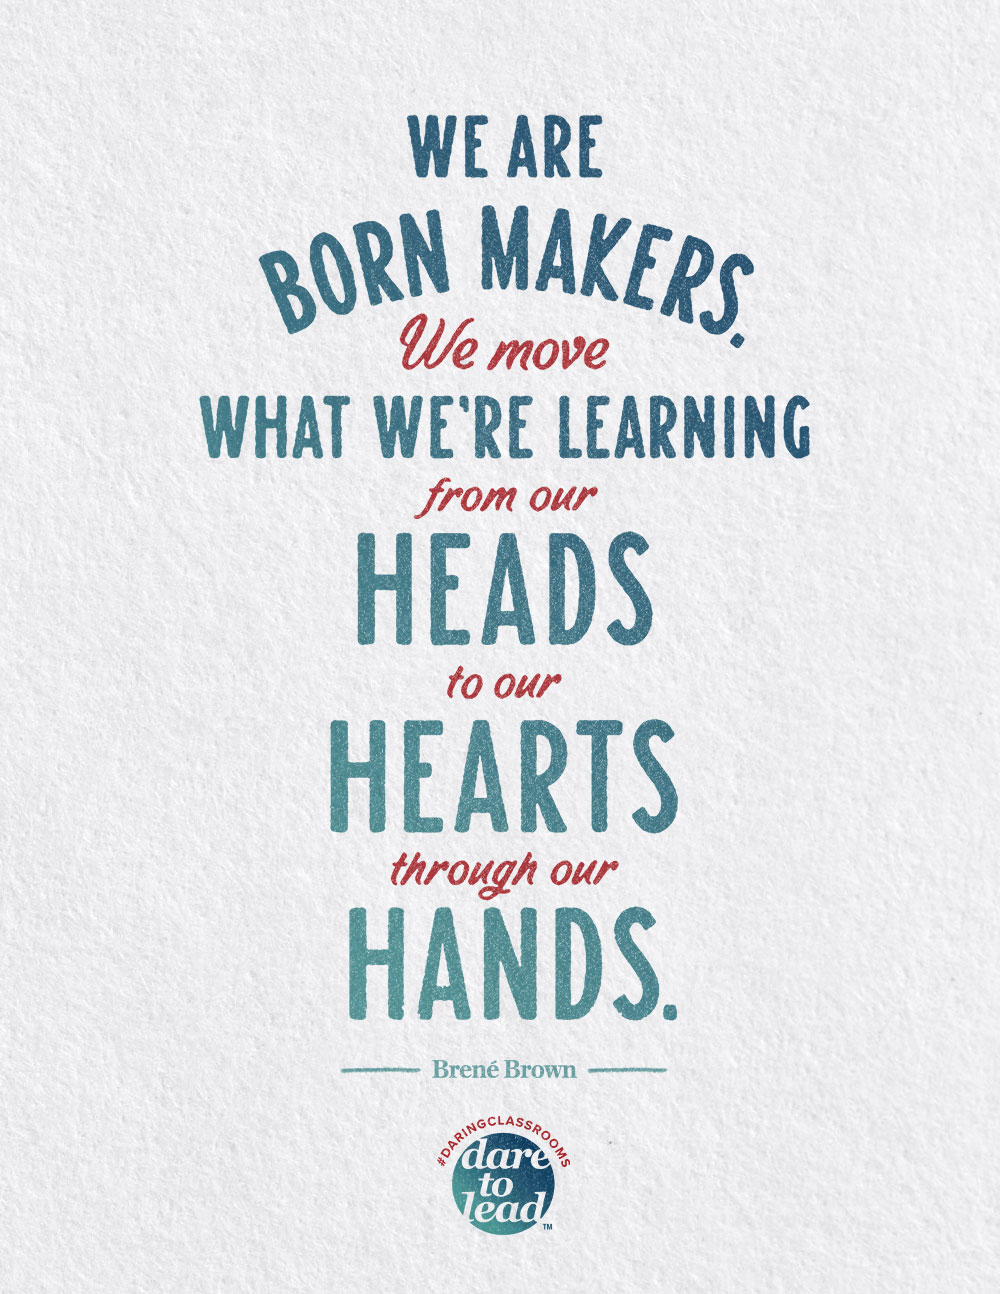 We are born makers. We move what we're learning from our heads to our hearts through our hands.